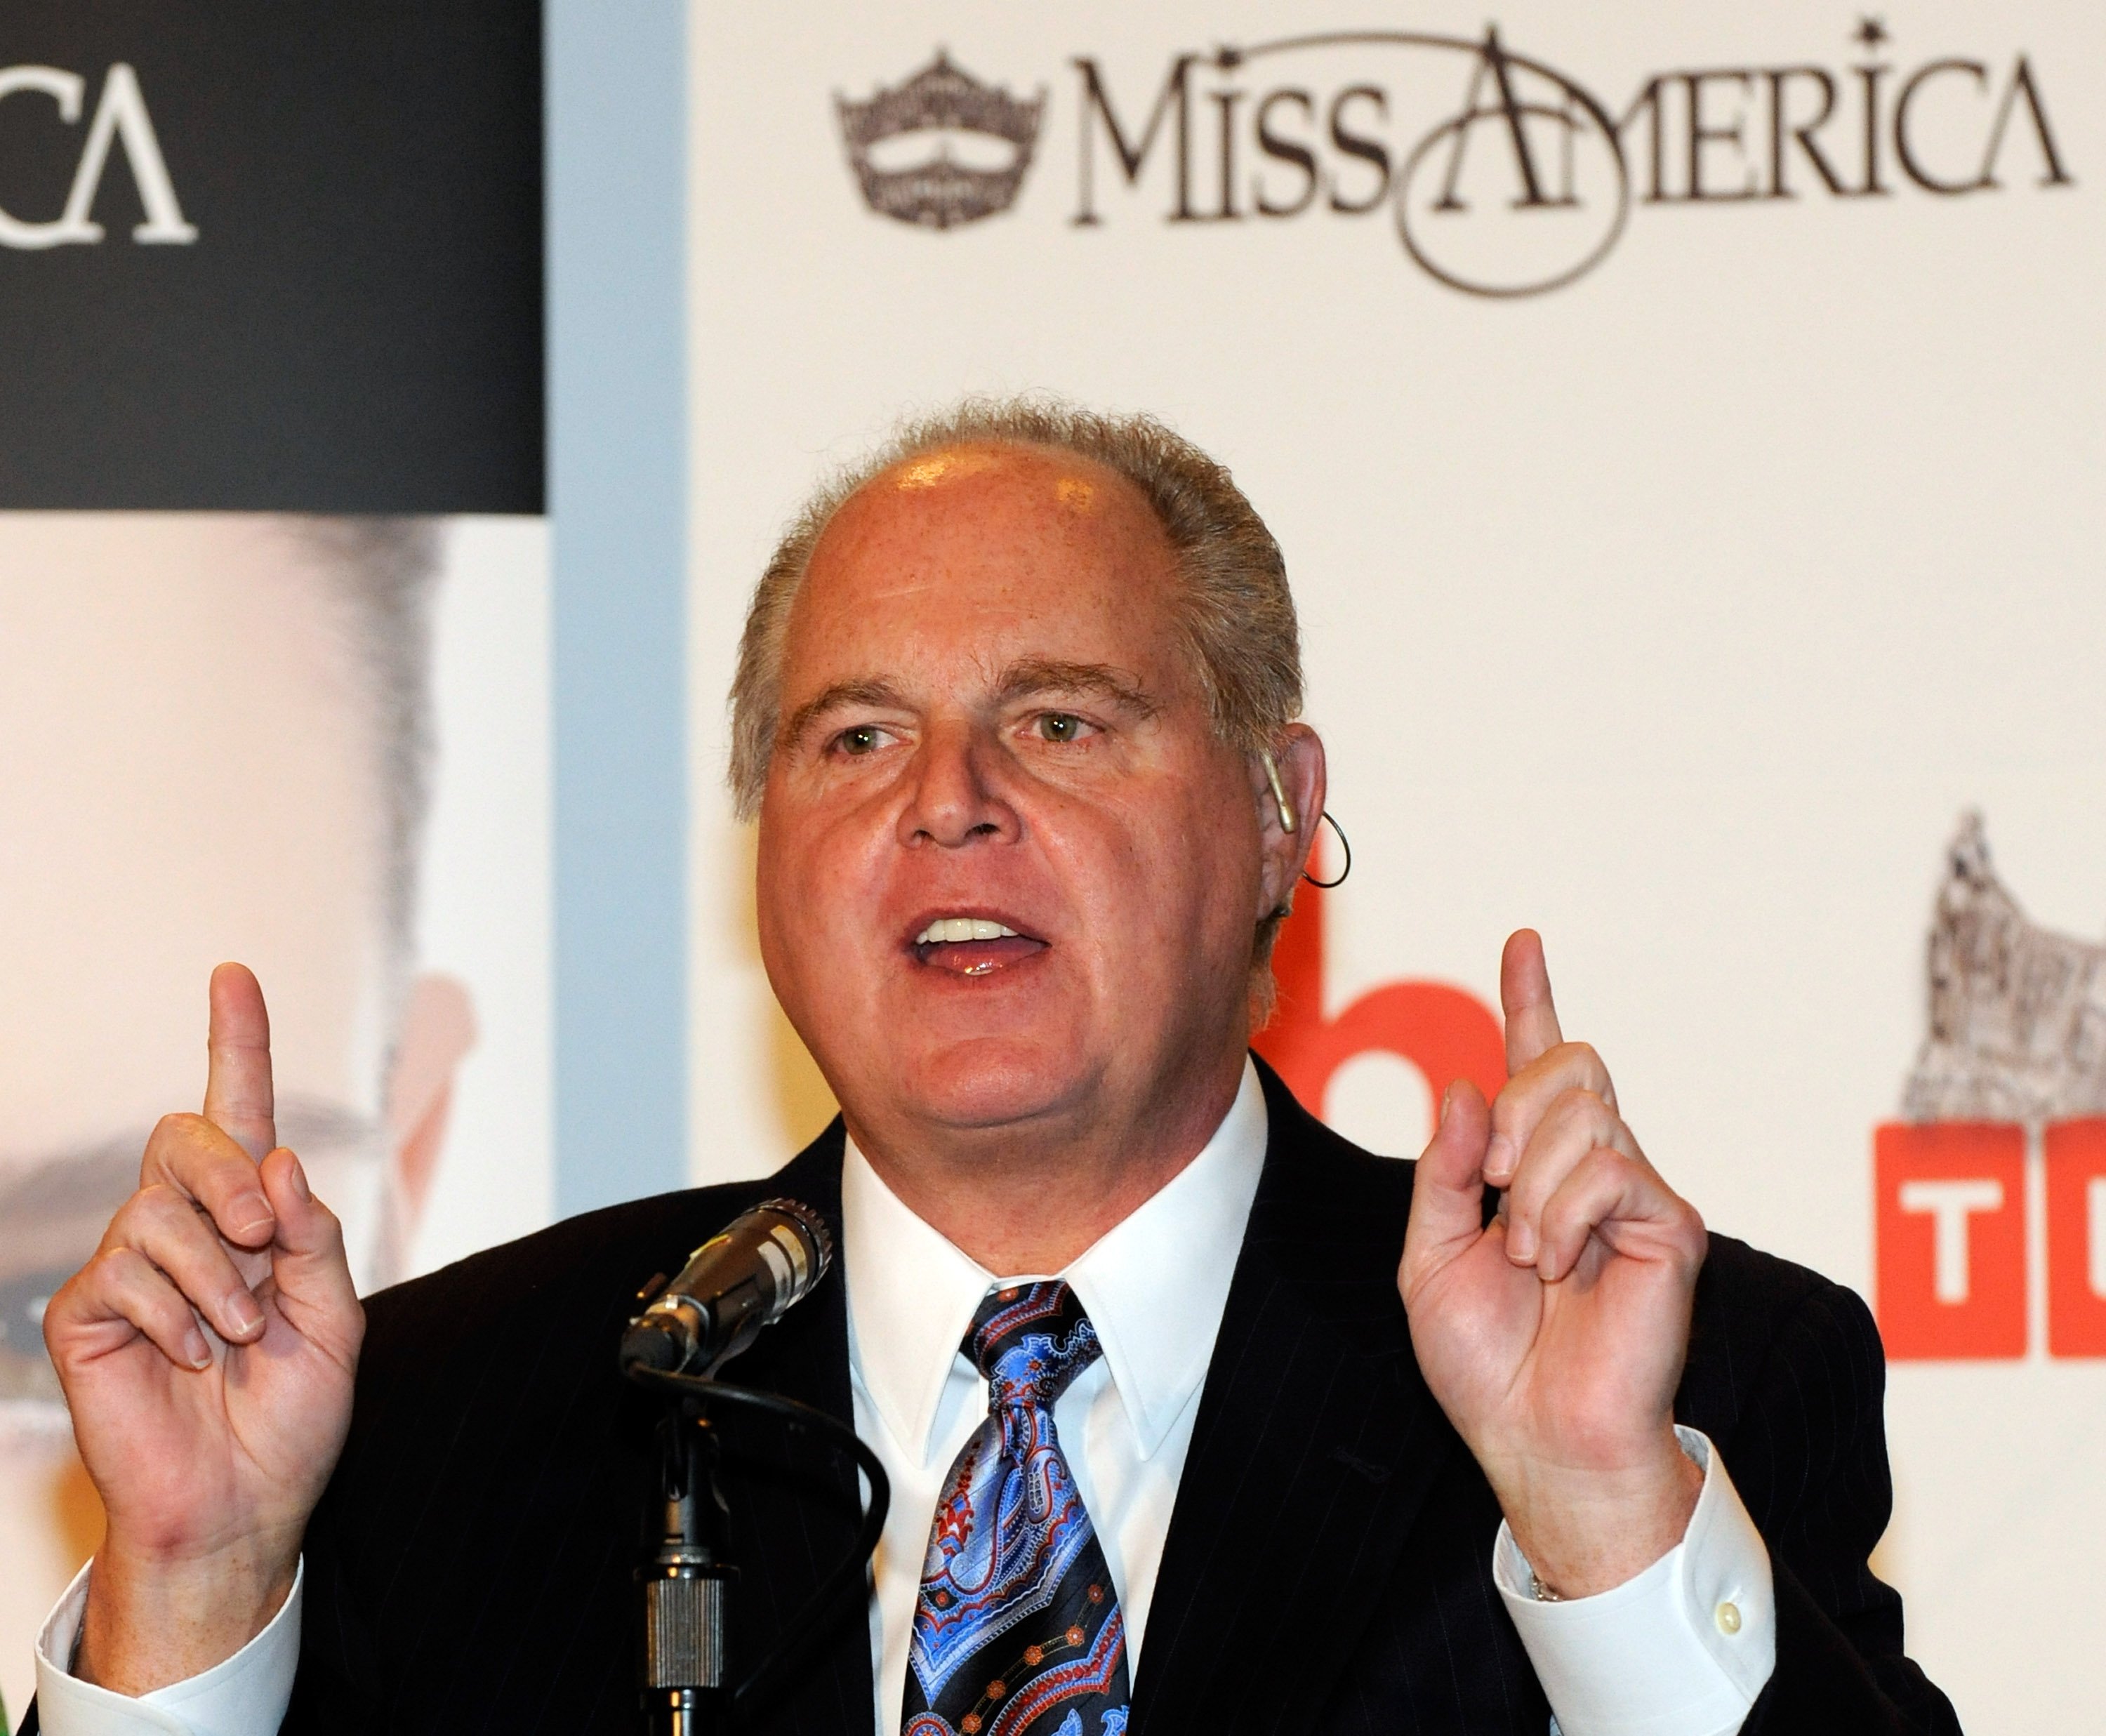 Radio talk show host and conservative commentator Rush Limbaug speaks during a news conference for judges at the Planet Hollywood Resort & Casino January 27, 2010, in Las Vegas, Nevada. | Source: Getty Images